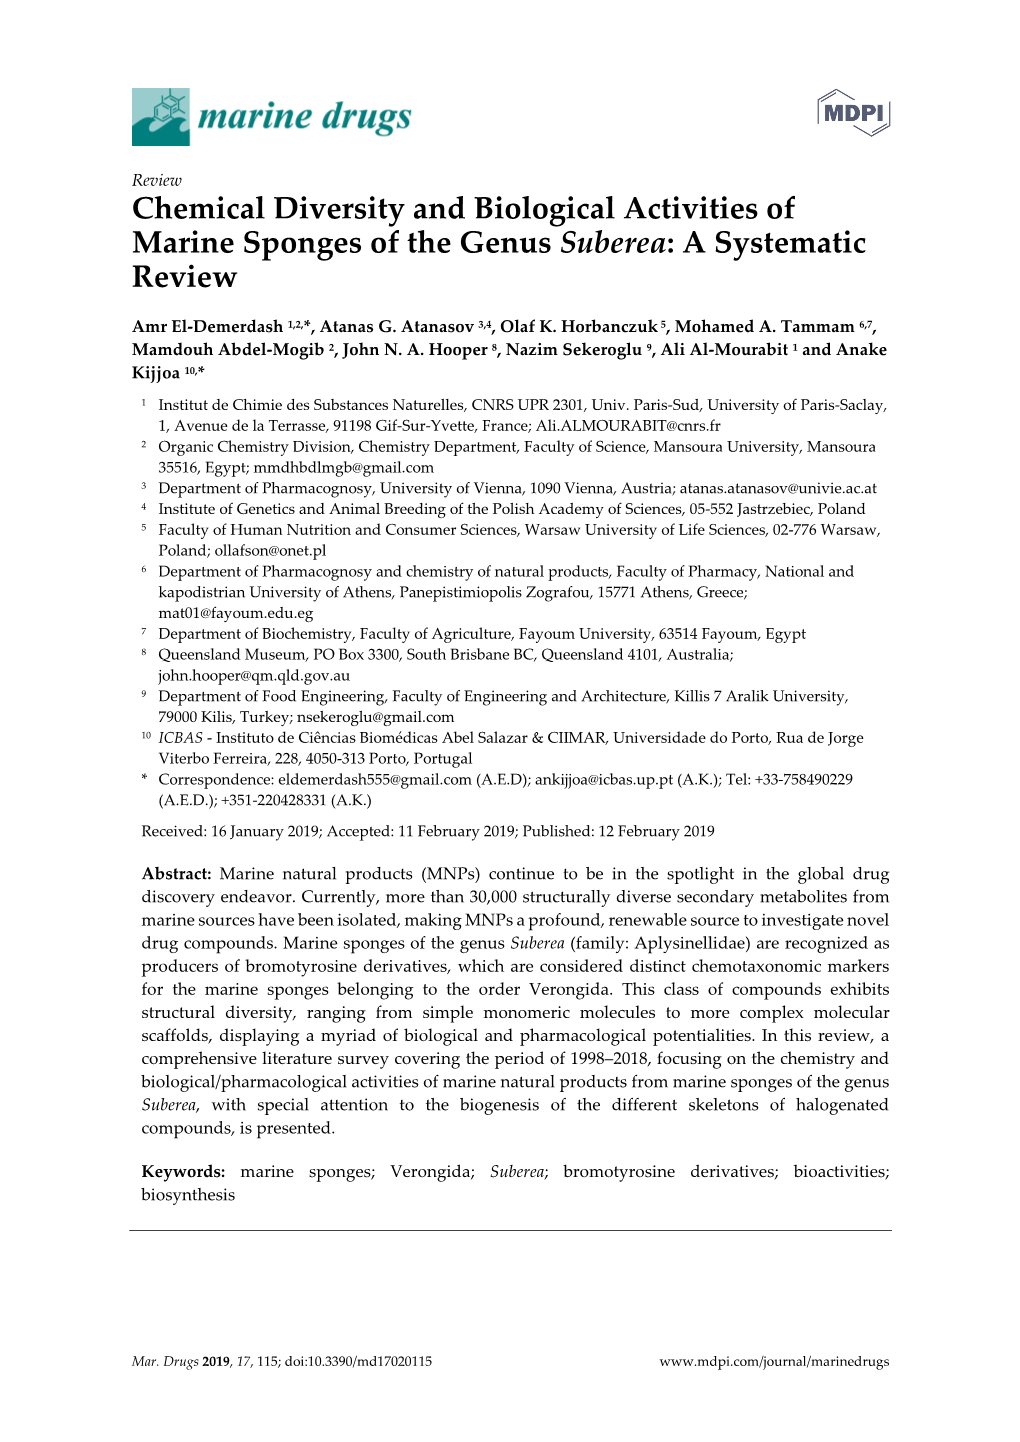 Chemical Diversity and Biological Activities of Marine Sponges of the Genus Suberea: a Systematic Review